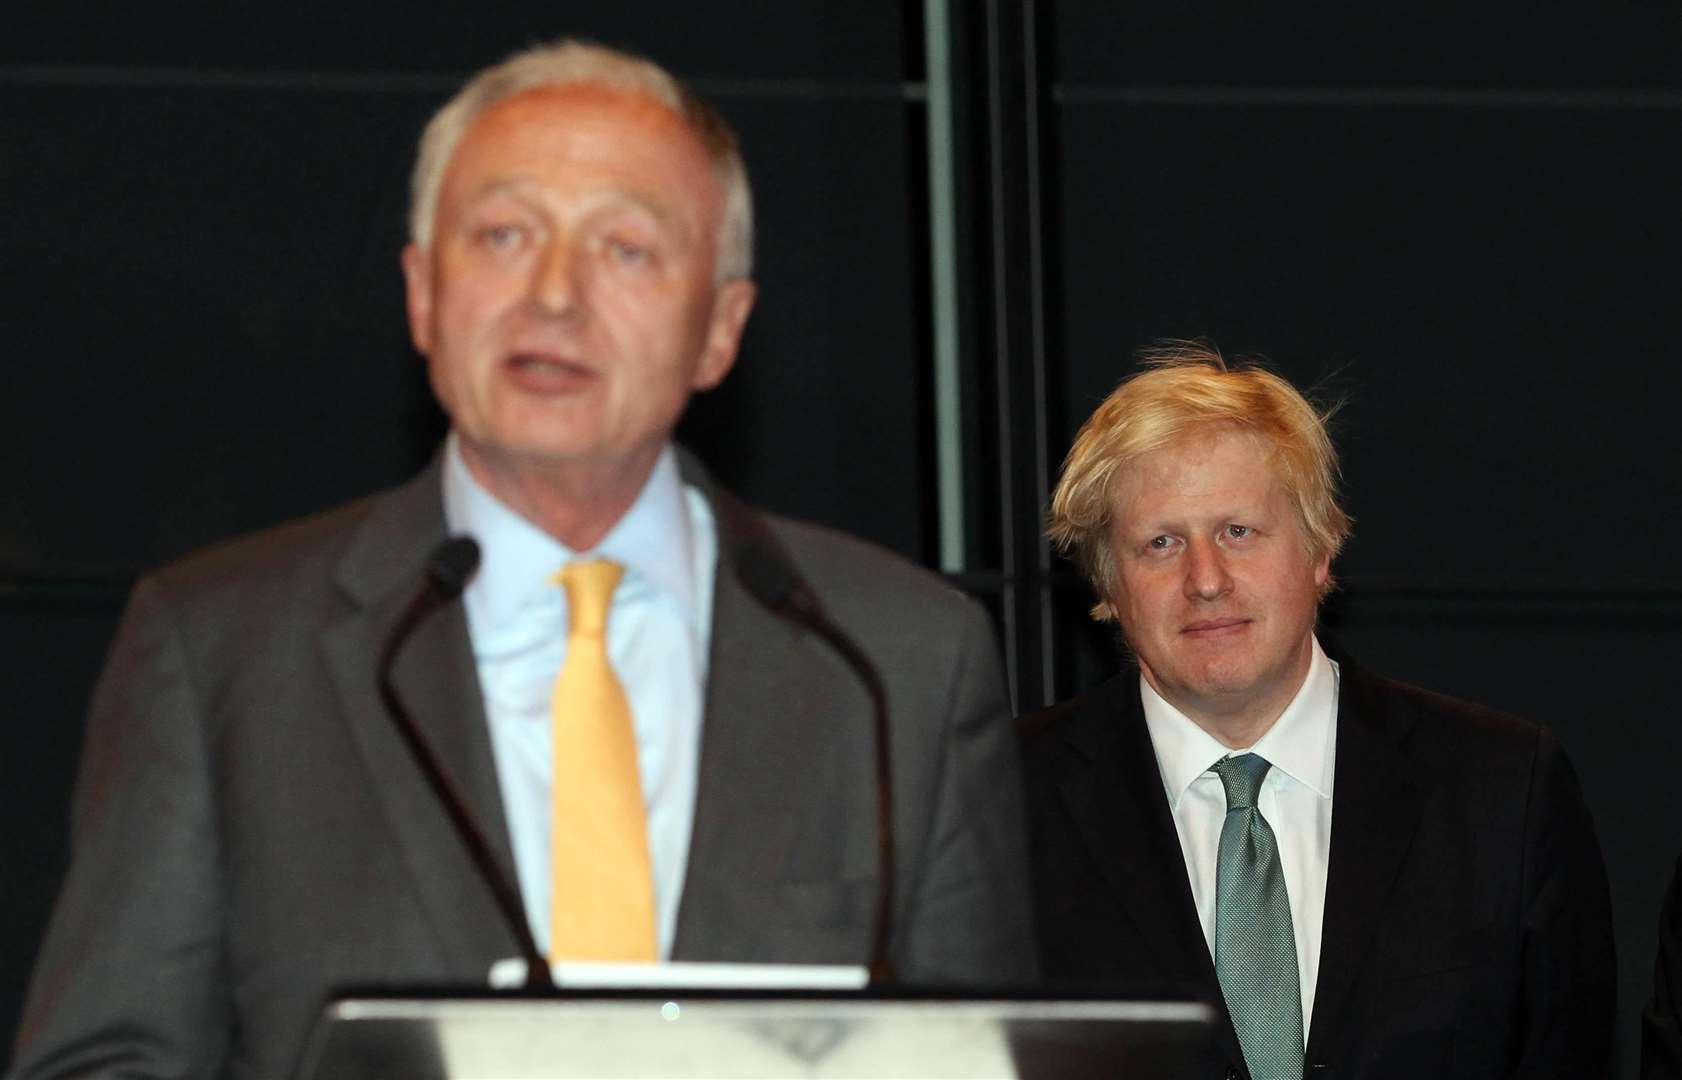 Ken Livingstone gives a speech in City Hall, London after Boris Johnson was re-elected Mayor of London (Lewis Whyld/PA)